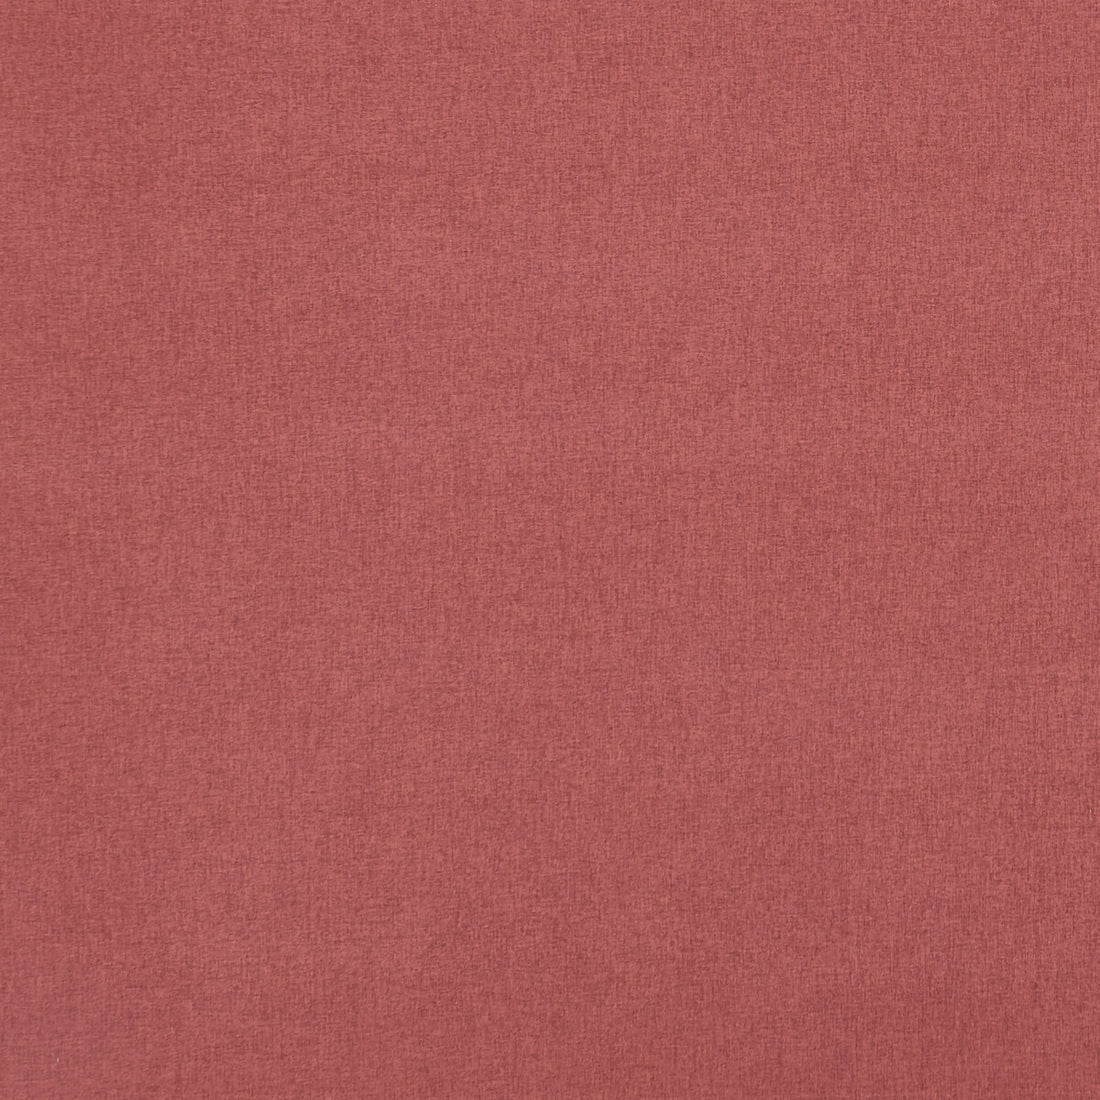 Highlander fabric in garnet rose color - pattern F0848/14.CAC.0 - by Clarke And Clarke in the Clarke &amp; Clarke Highlander collection